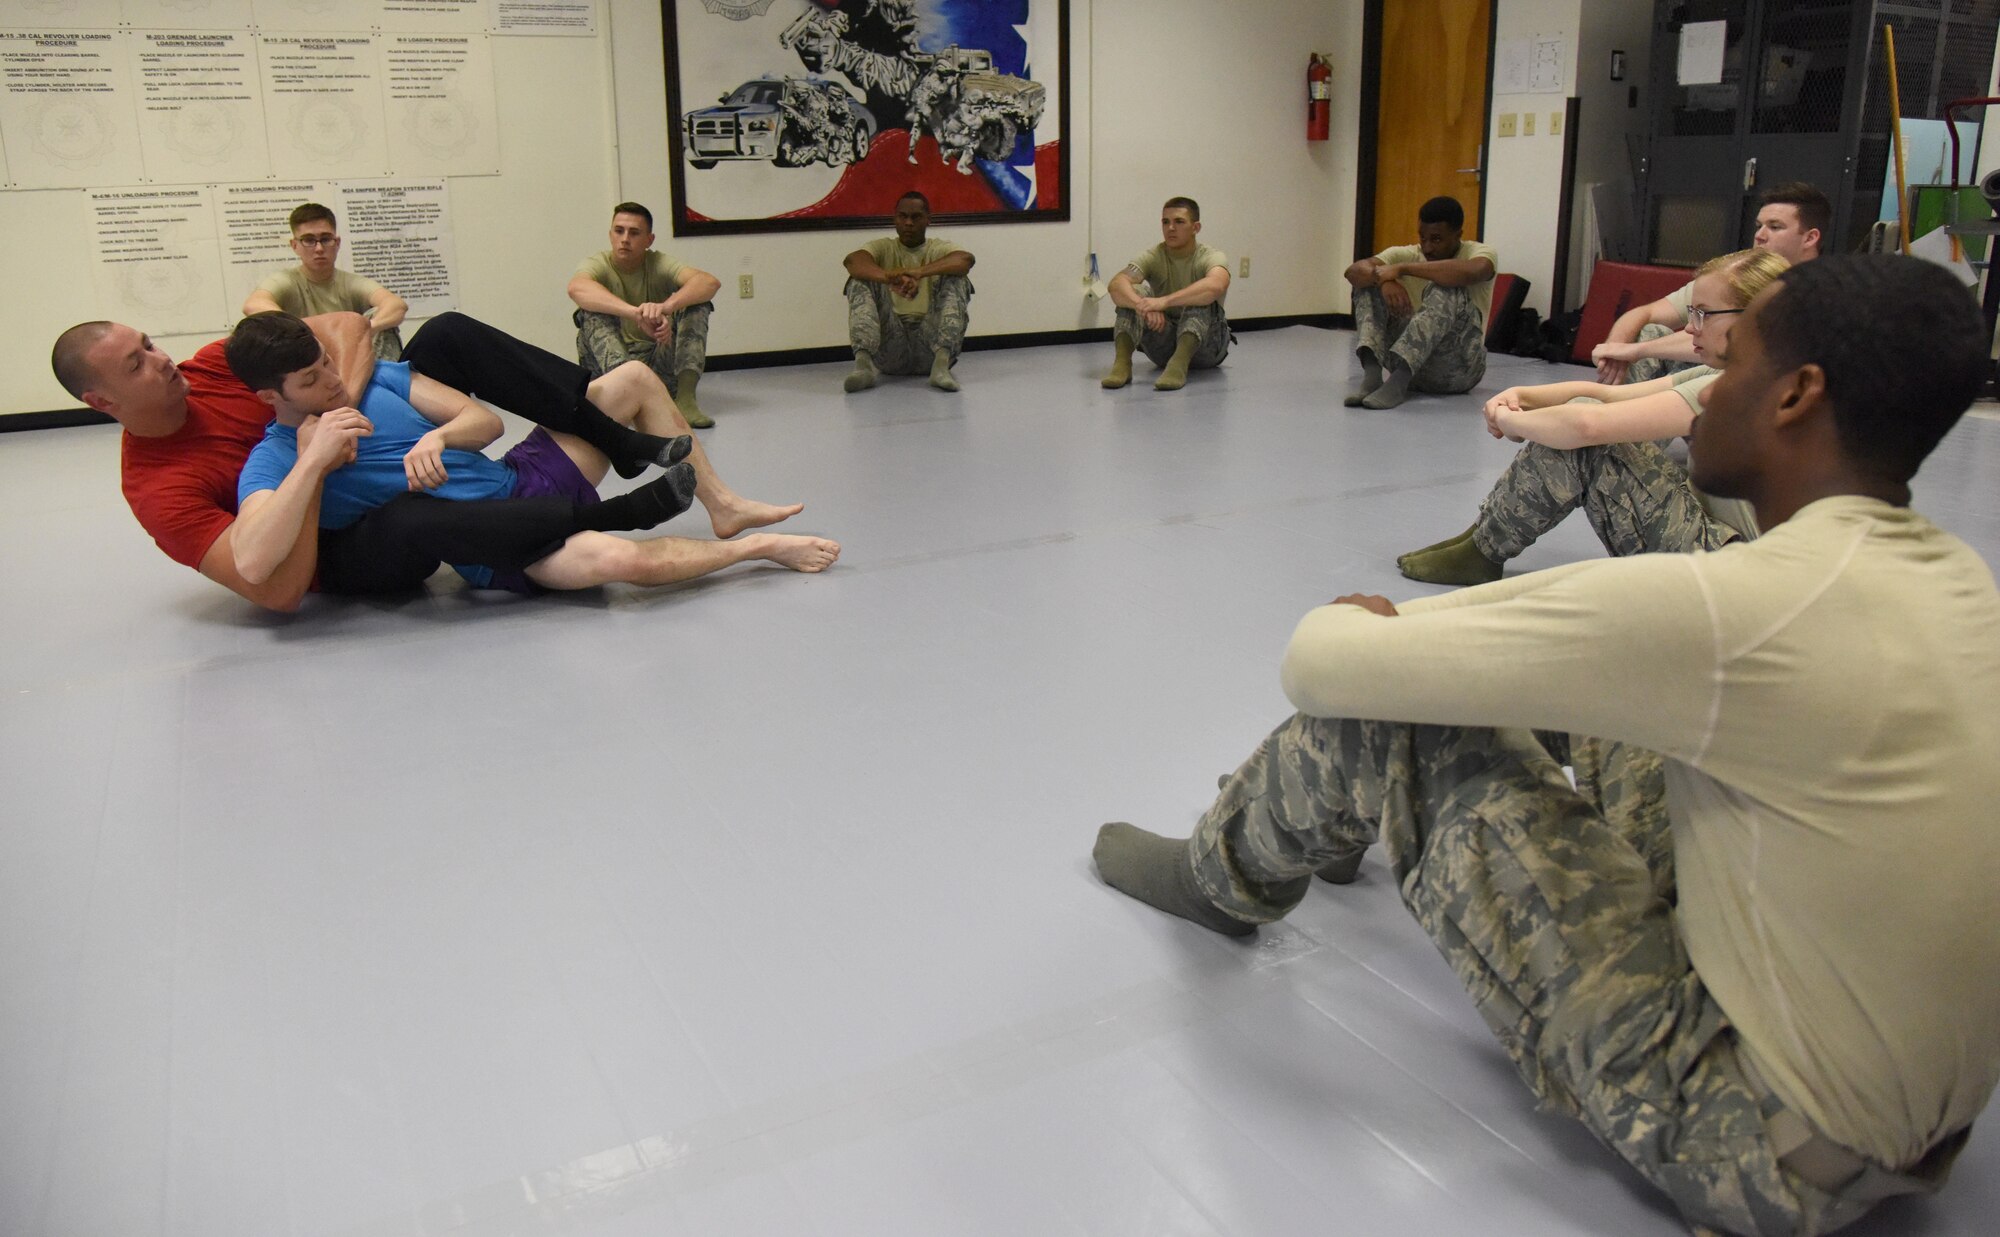 Officer Justin Depew, 81st Security Forces Squadron unit trainer, and Staff Sgt. Clarence Rainey, 81st SFS base defense operations center controller, demonstrate a combative technique during an 81st SFS combative training course at the SFS building Oct. 19, 2017, on Keesler Air Force Base, Mississippi. Approximately 15-20 defenders were taught skills vital to surviving a hand-to-hand ground fight using mixed martial arts and Jiu Jitsu techniques as another tool to survive a confrontational environment. (U.S. Air Force photo by Kemberly Groue)